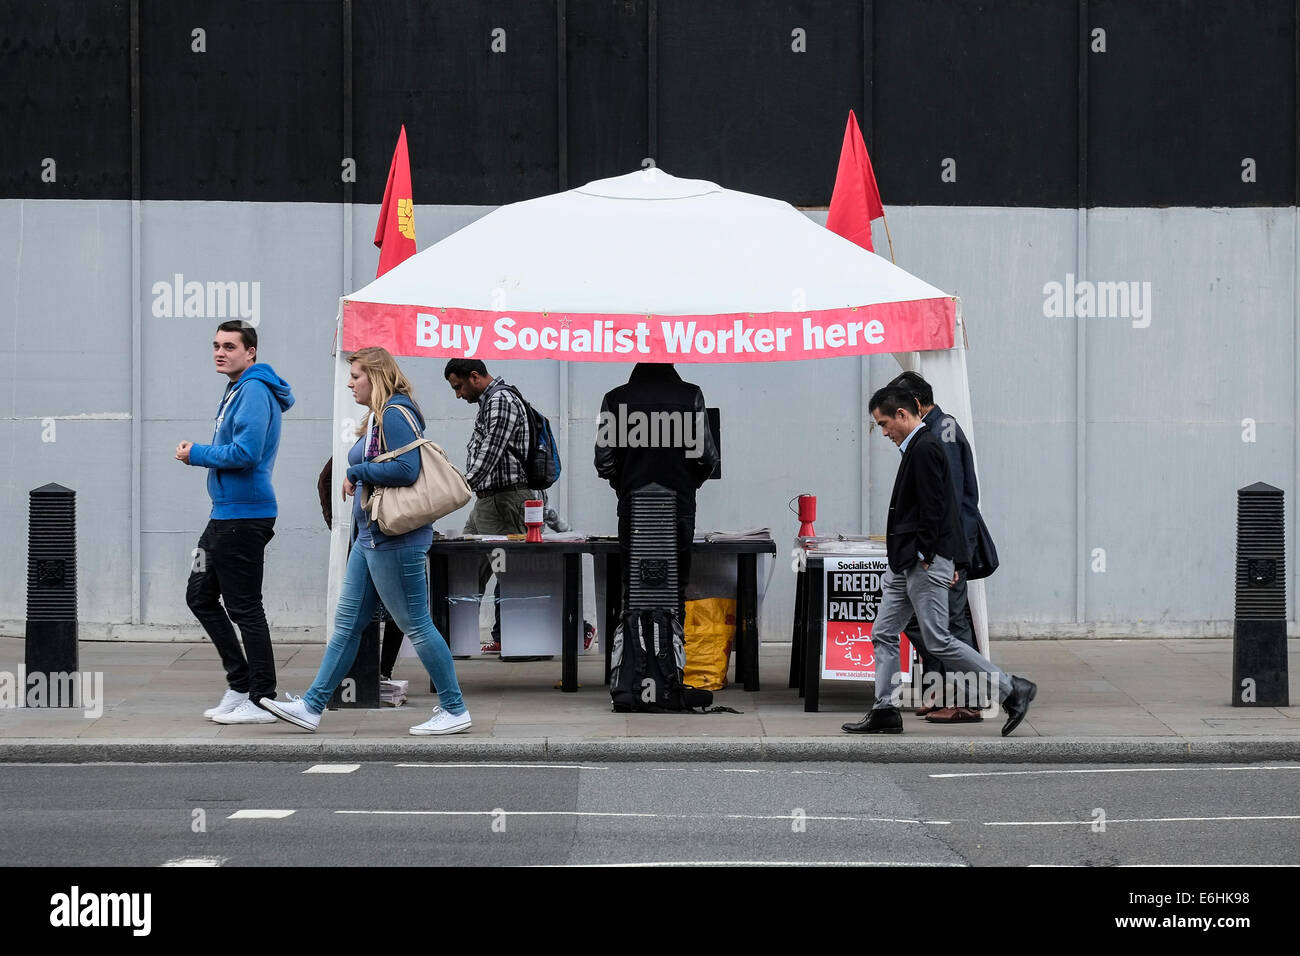 A stall selling copies of the Socialist Worker newspaper on a street. Stock Photo